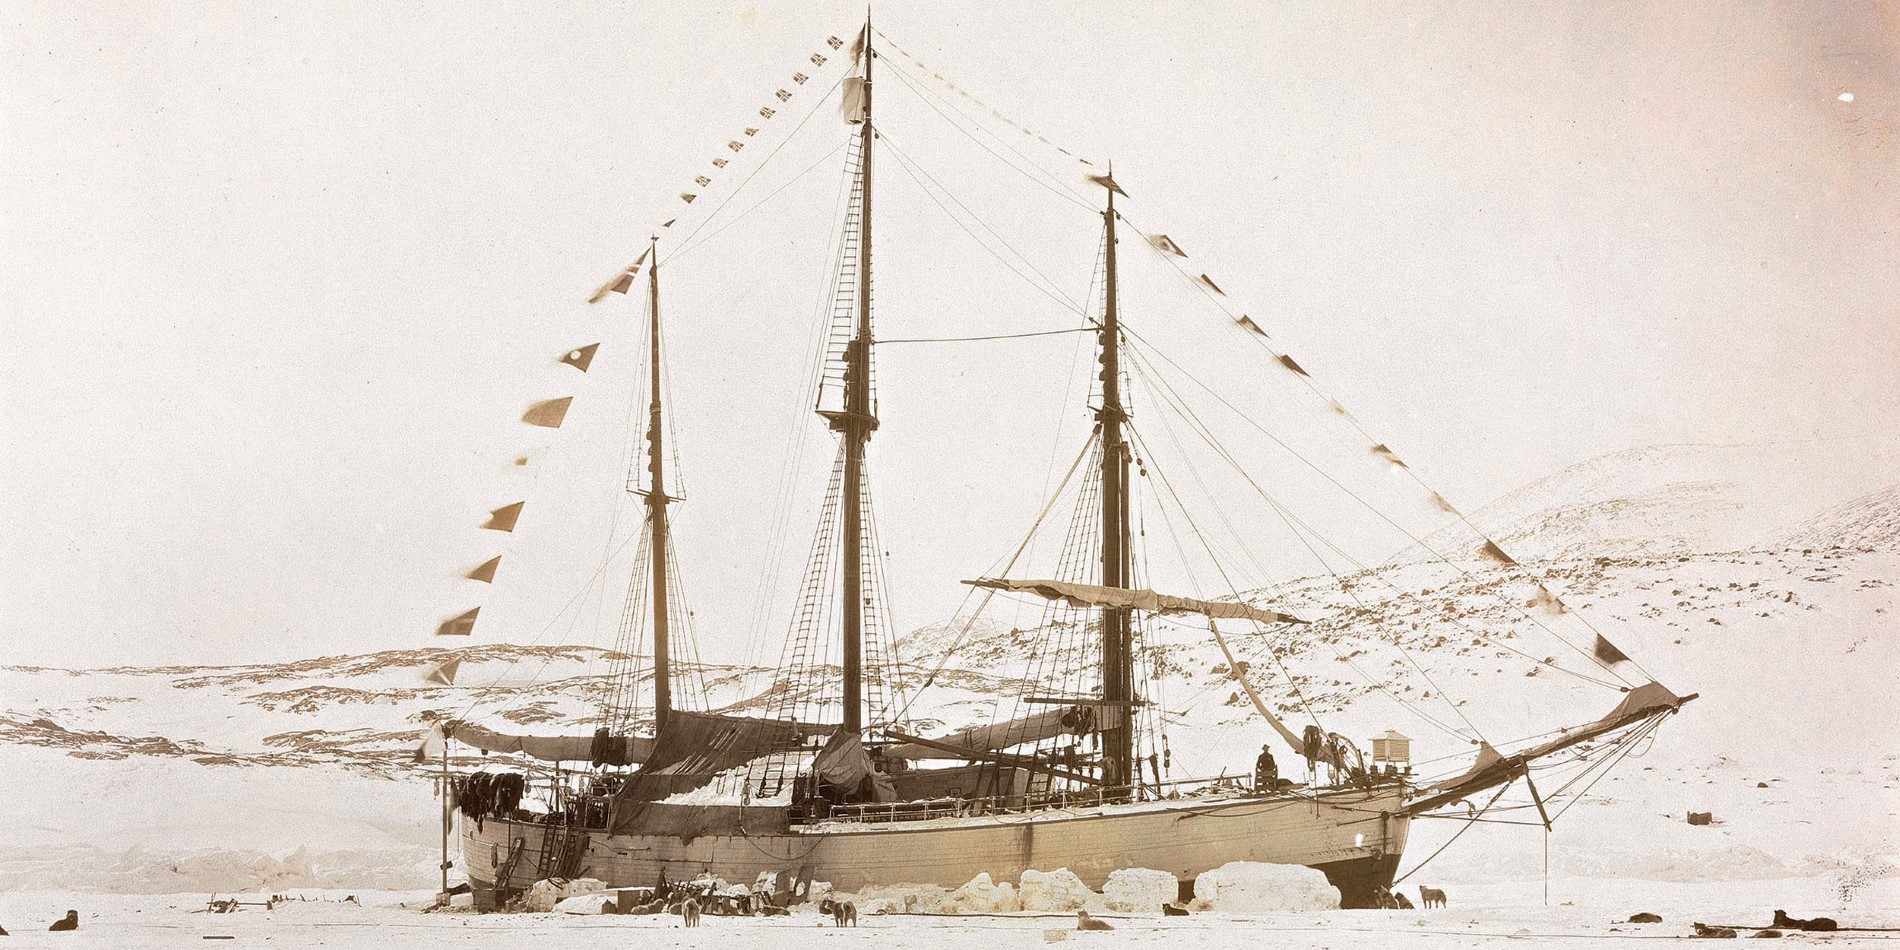 We sail in the wake of famous explorers and vessels like Fram, and we have explored Arctic waters since 1896. 